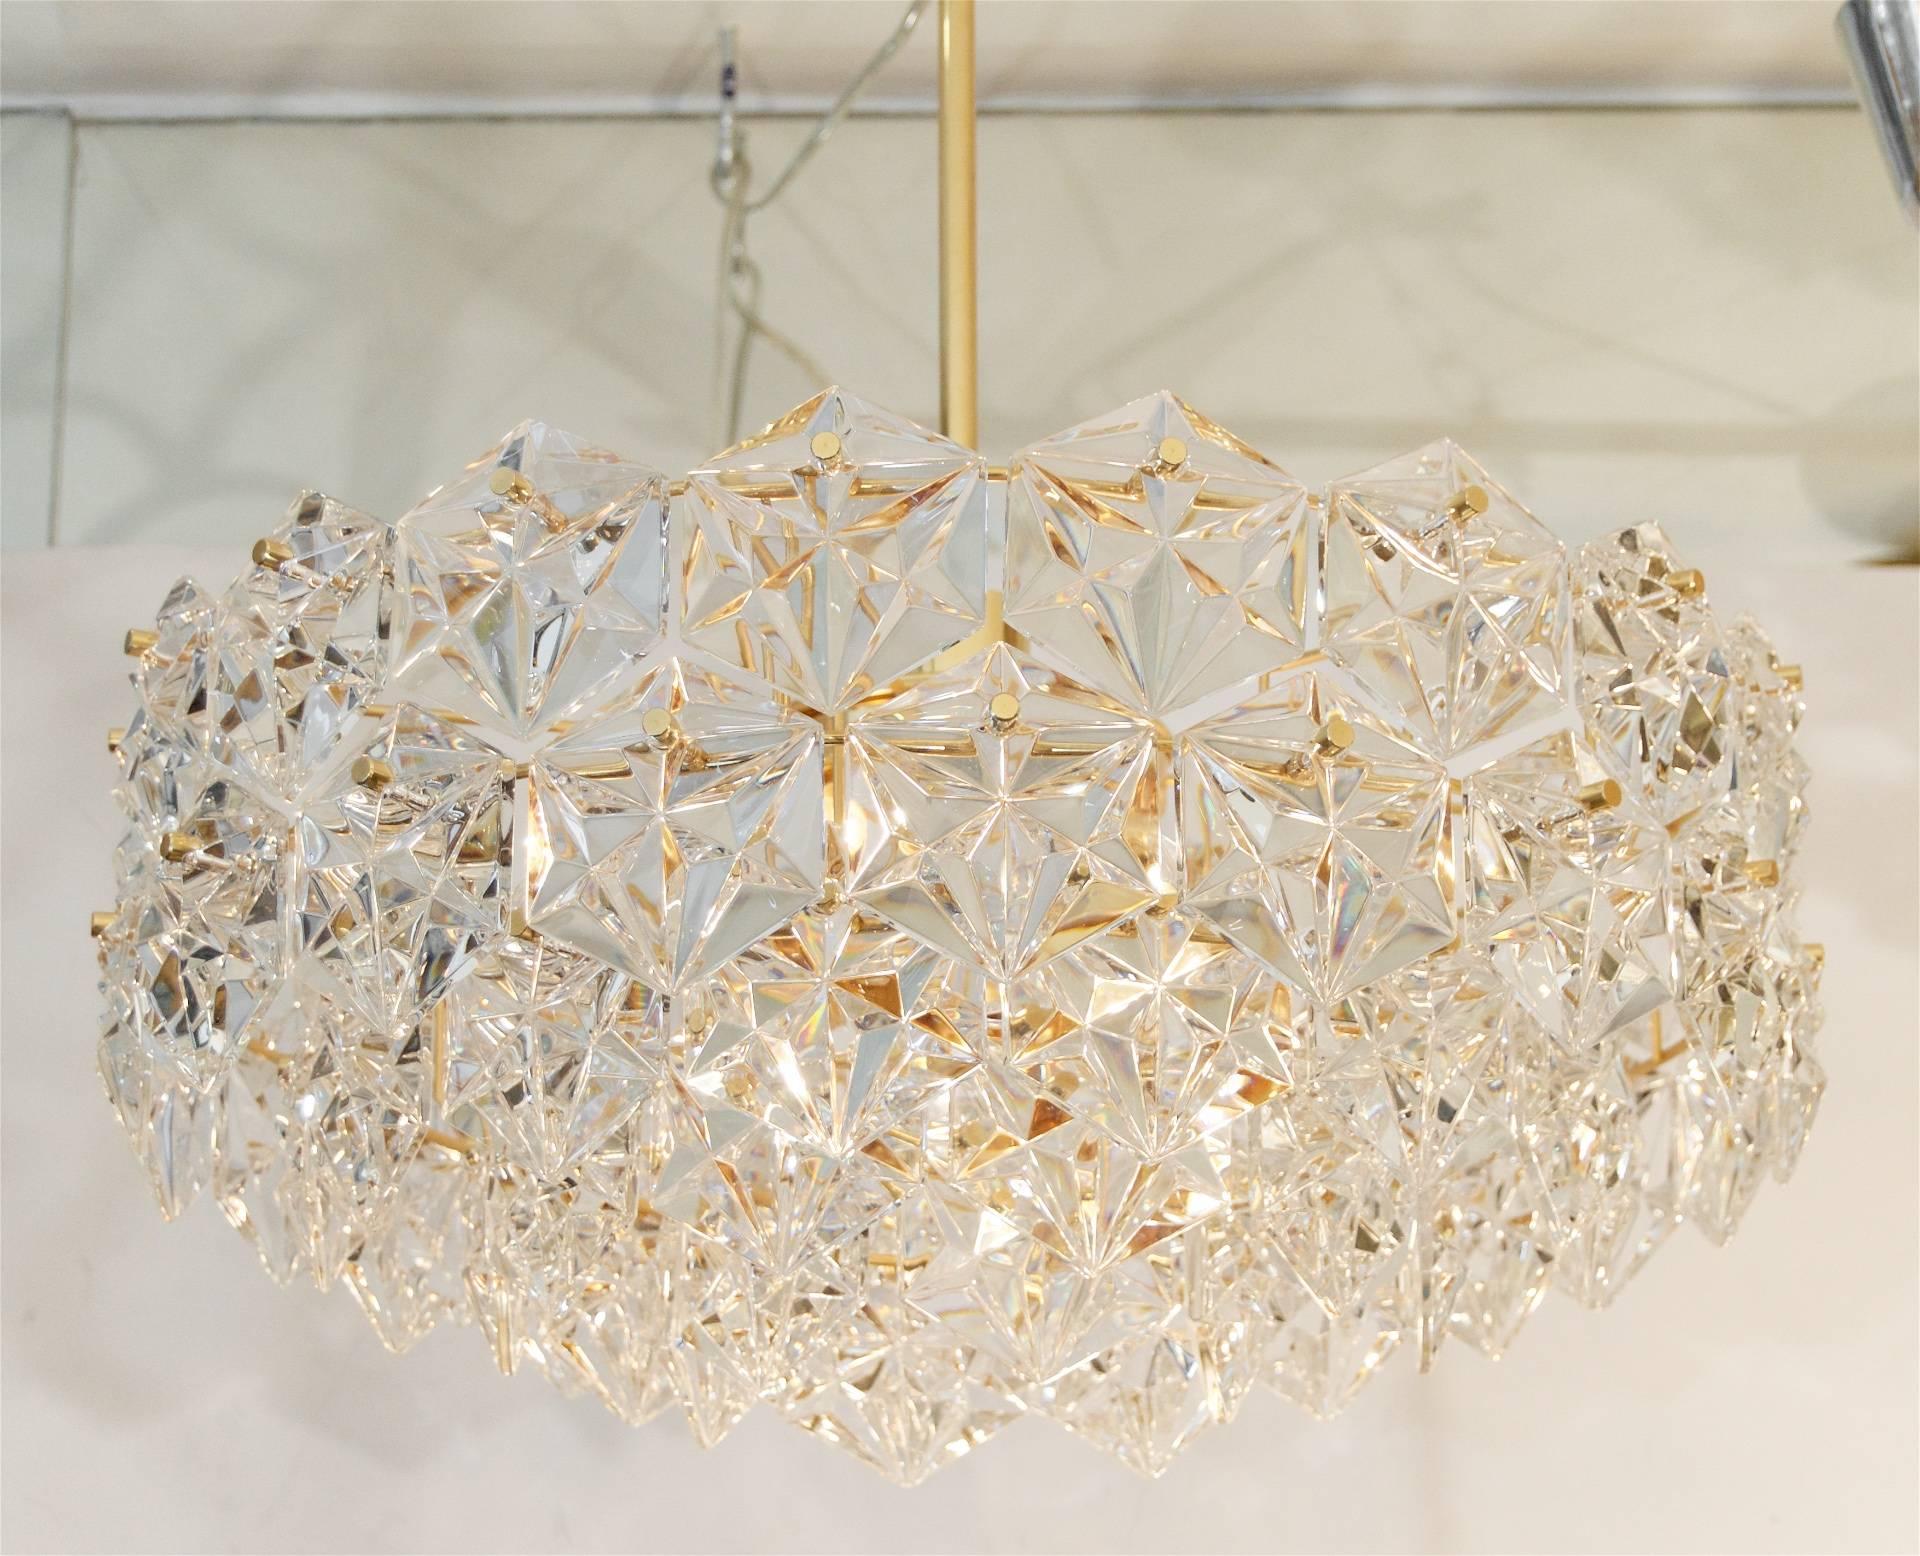 Elegant five-tier chandelier with faceted hexagonal crystals and a gold-plated chandelier body.

Take six E-14 base bulbs radially from the body (up to 40 watts each) and one medium base downlight (up to 75 watts.)

Height listed is of